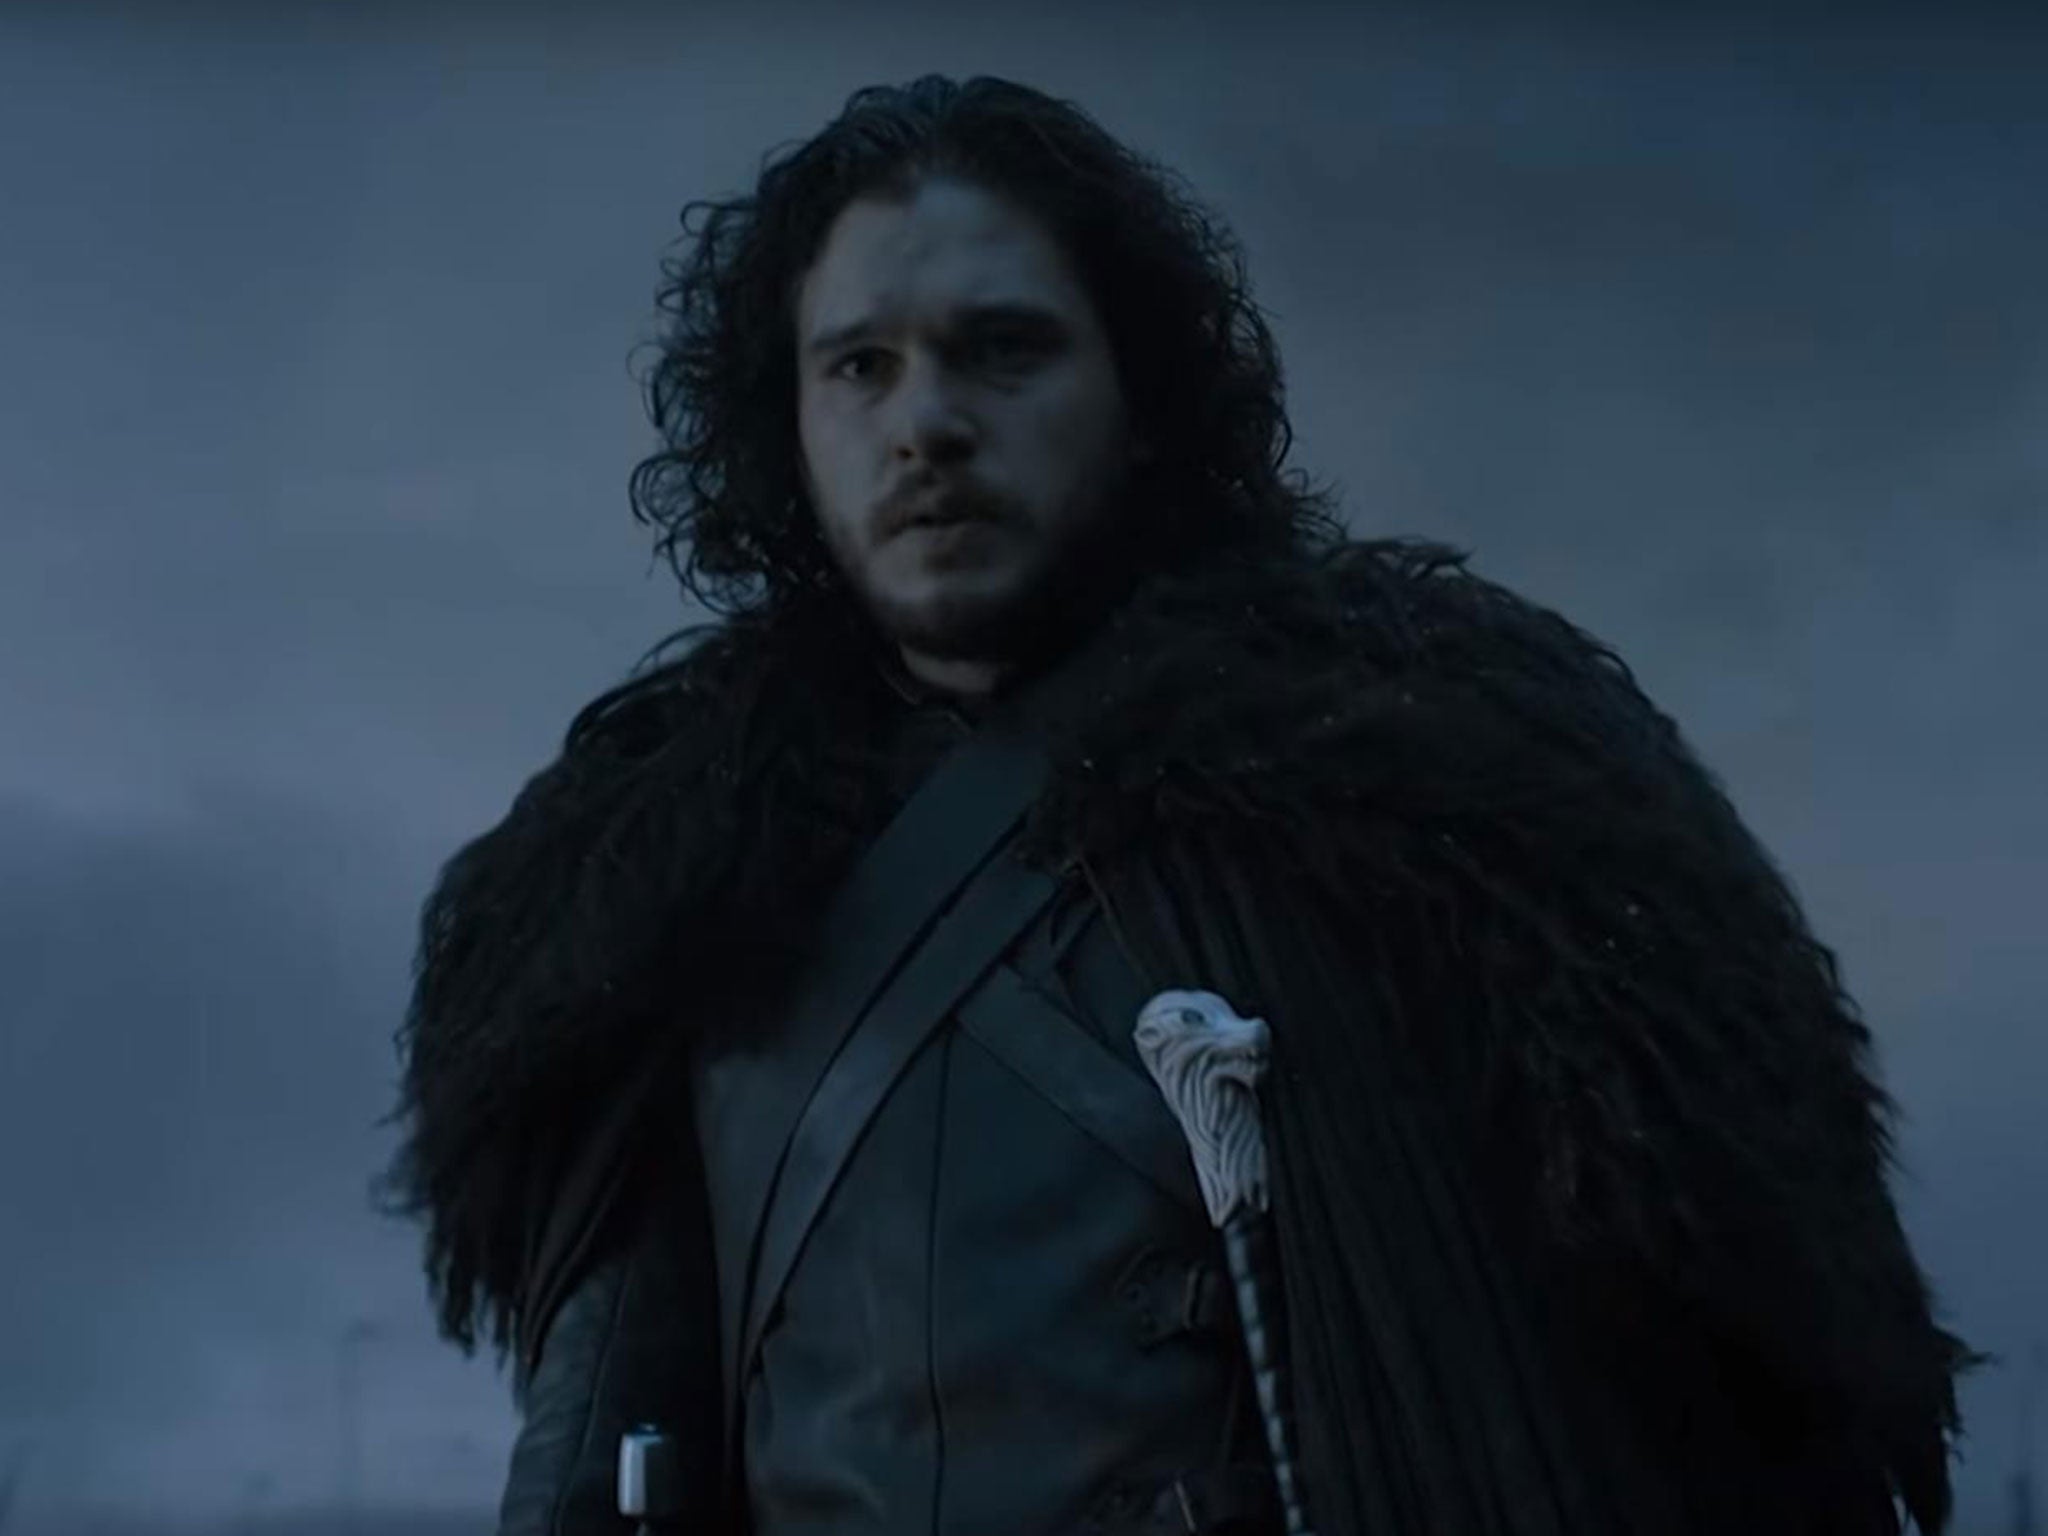 Old footage of Jon Snow featured heavily in the trailer